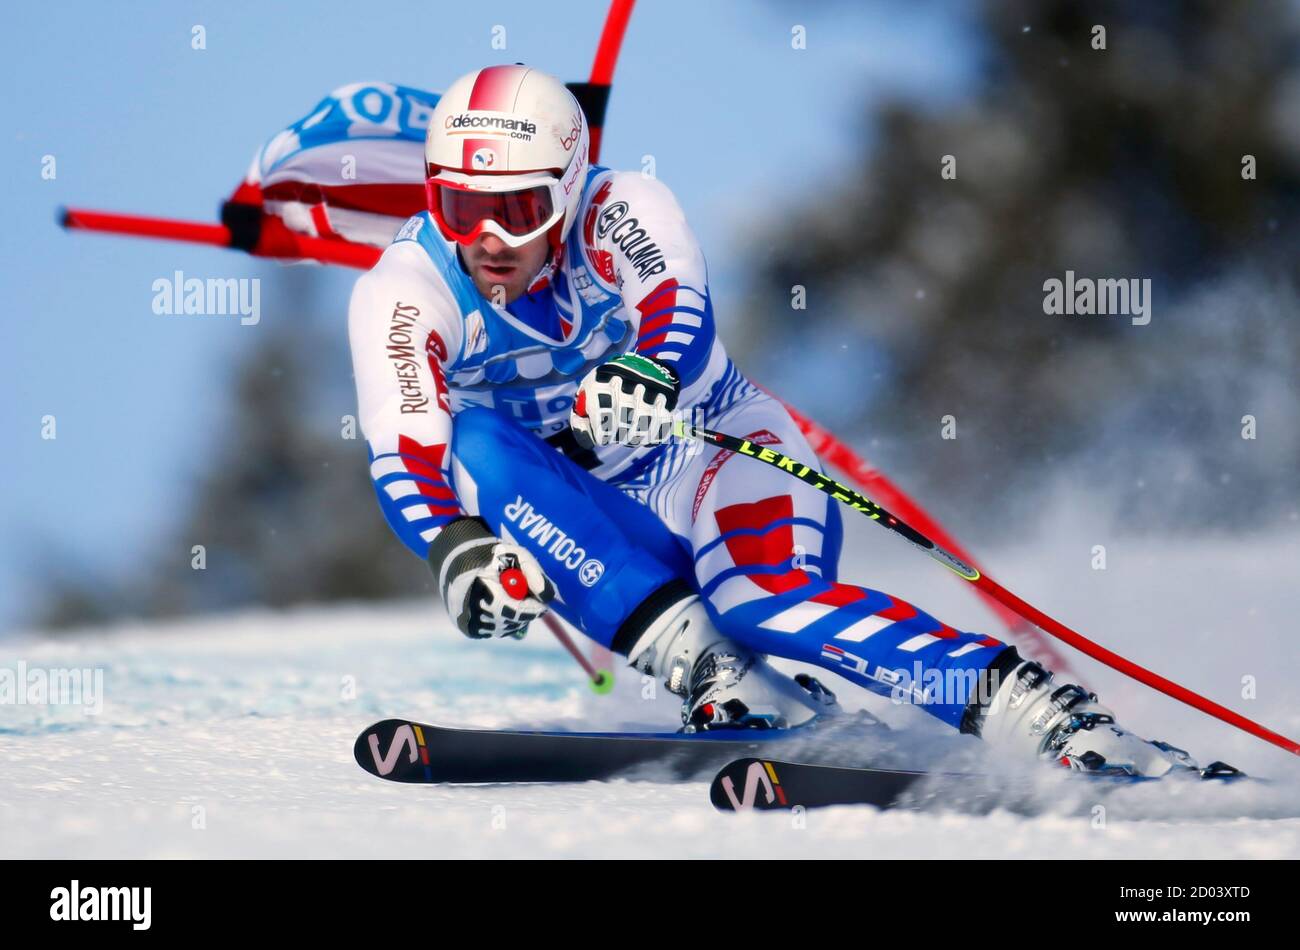 Adrien Theaux of France hits a gate during alpine skiing training for the Men's World Cup downhill in Lake Louise, Alberta November 21, 2012.  REUTERS/Mike Blake  (CANADA - Tags: SPORT SKIING) Stock Photo